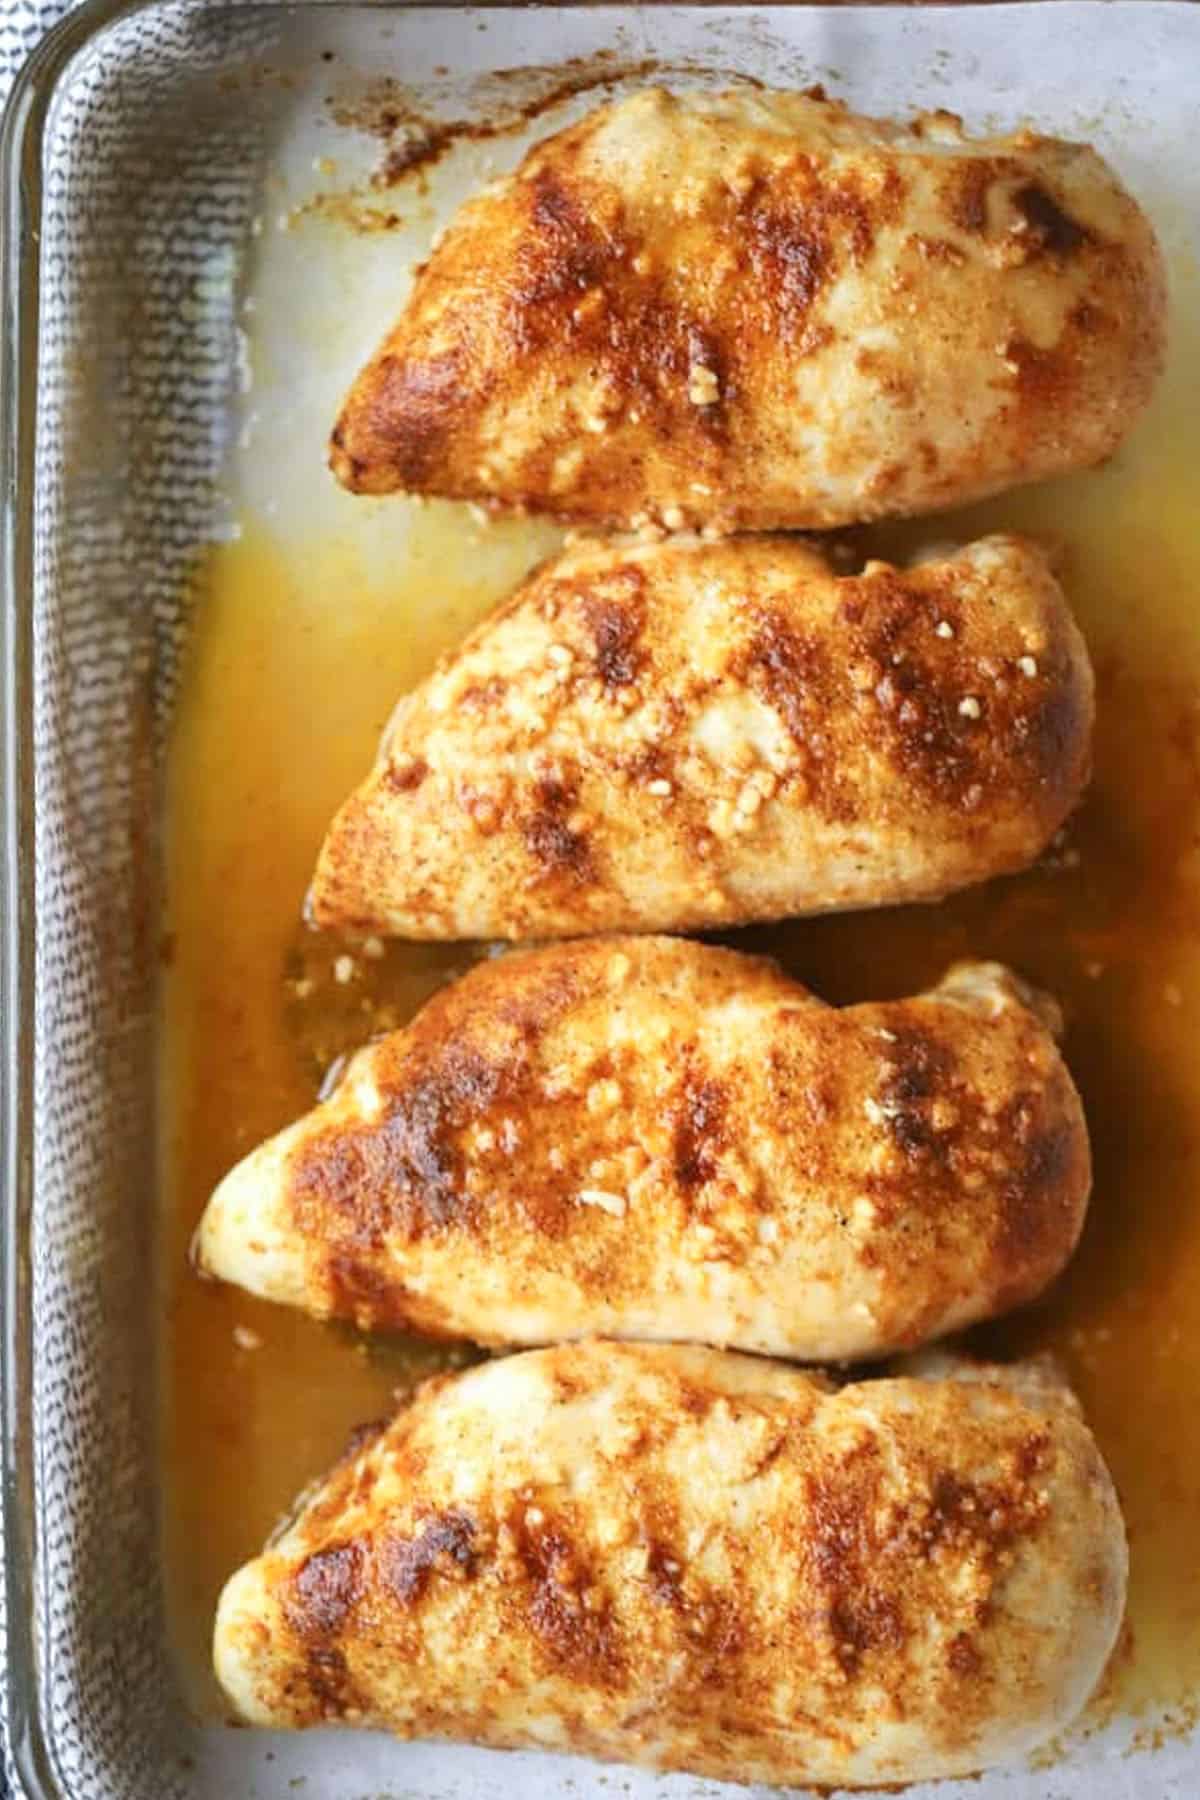 Simple Oven Baked Chicken Breast - The Carefree Kitchen